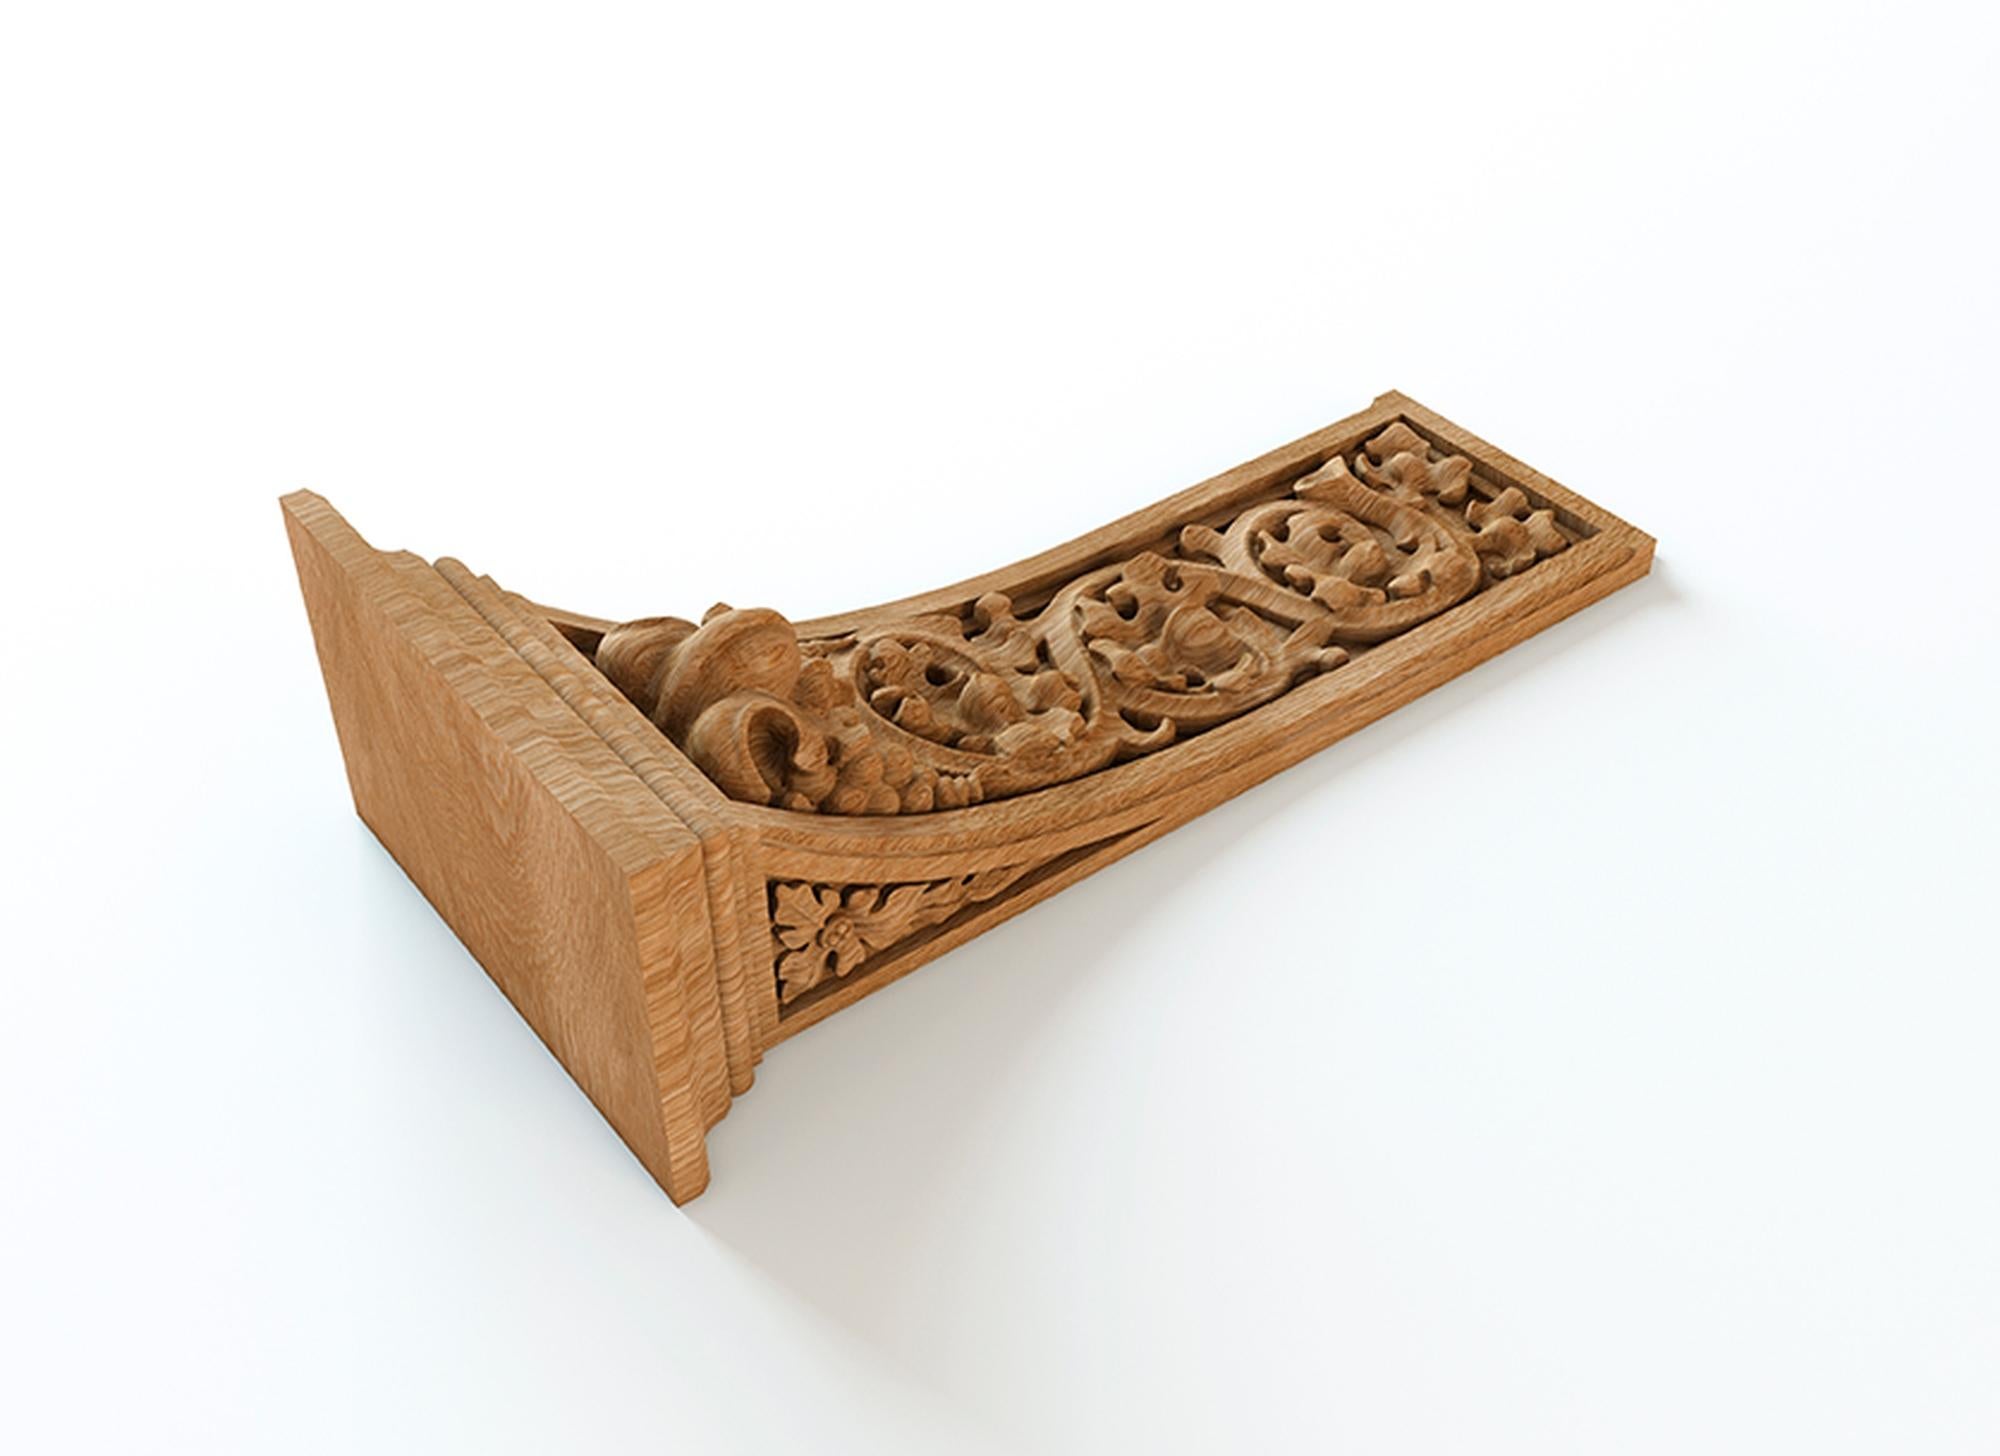 High-quality unfinished carved wooden corbel. Unpainted.

>> SKU: KR-055

>> Dimensions (A x B x C x e):

1) 10.55